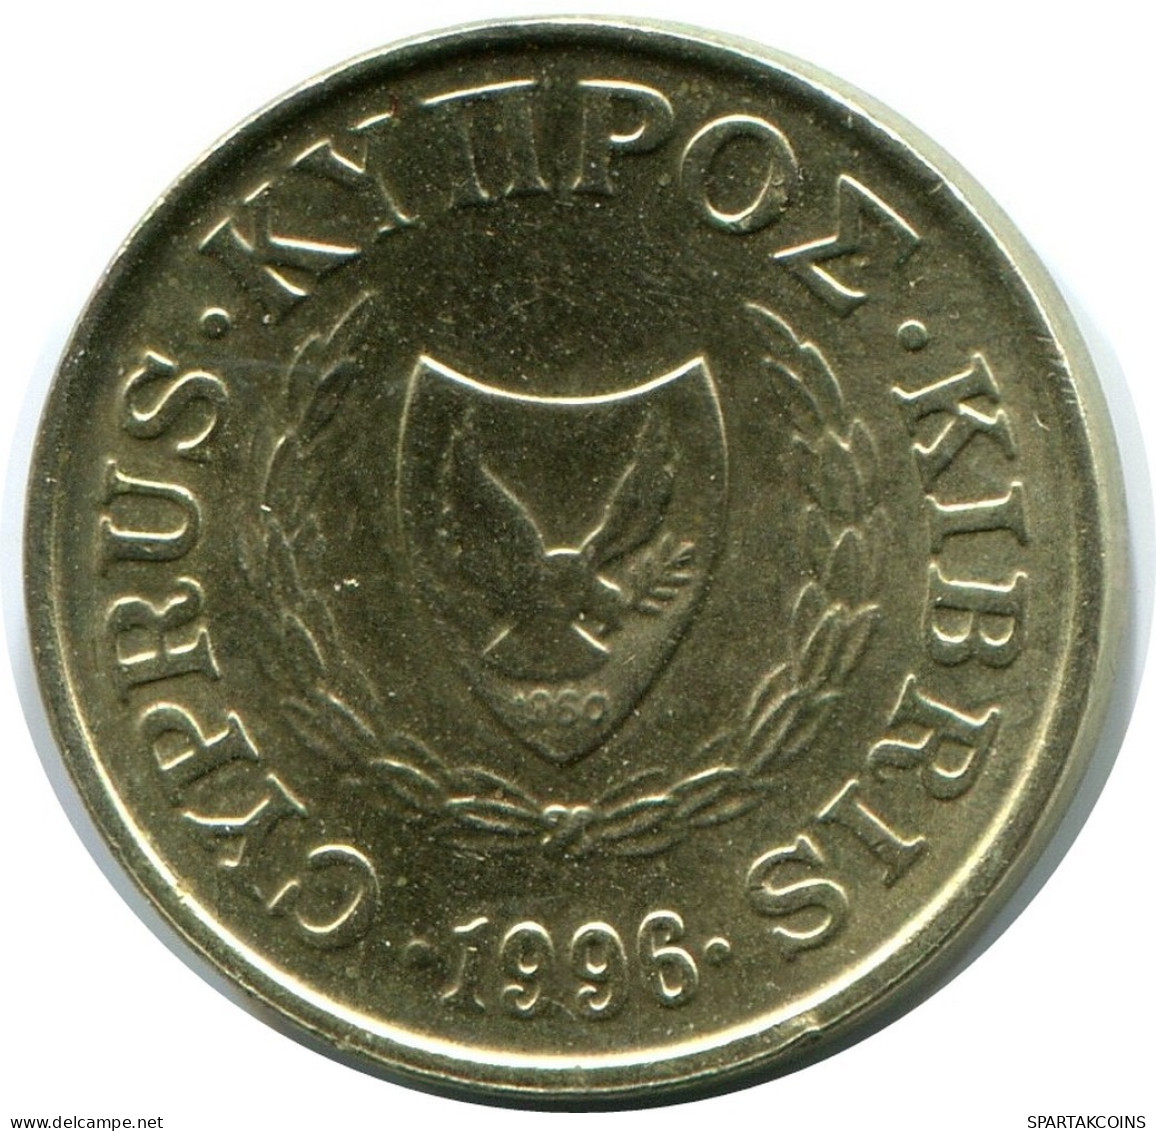 1 CENTS 1996 CYPRUS Coin #AP299.U.A - Chipre